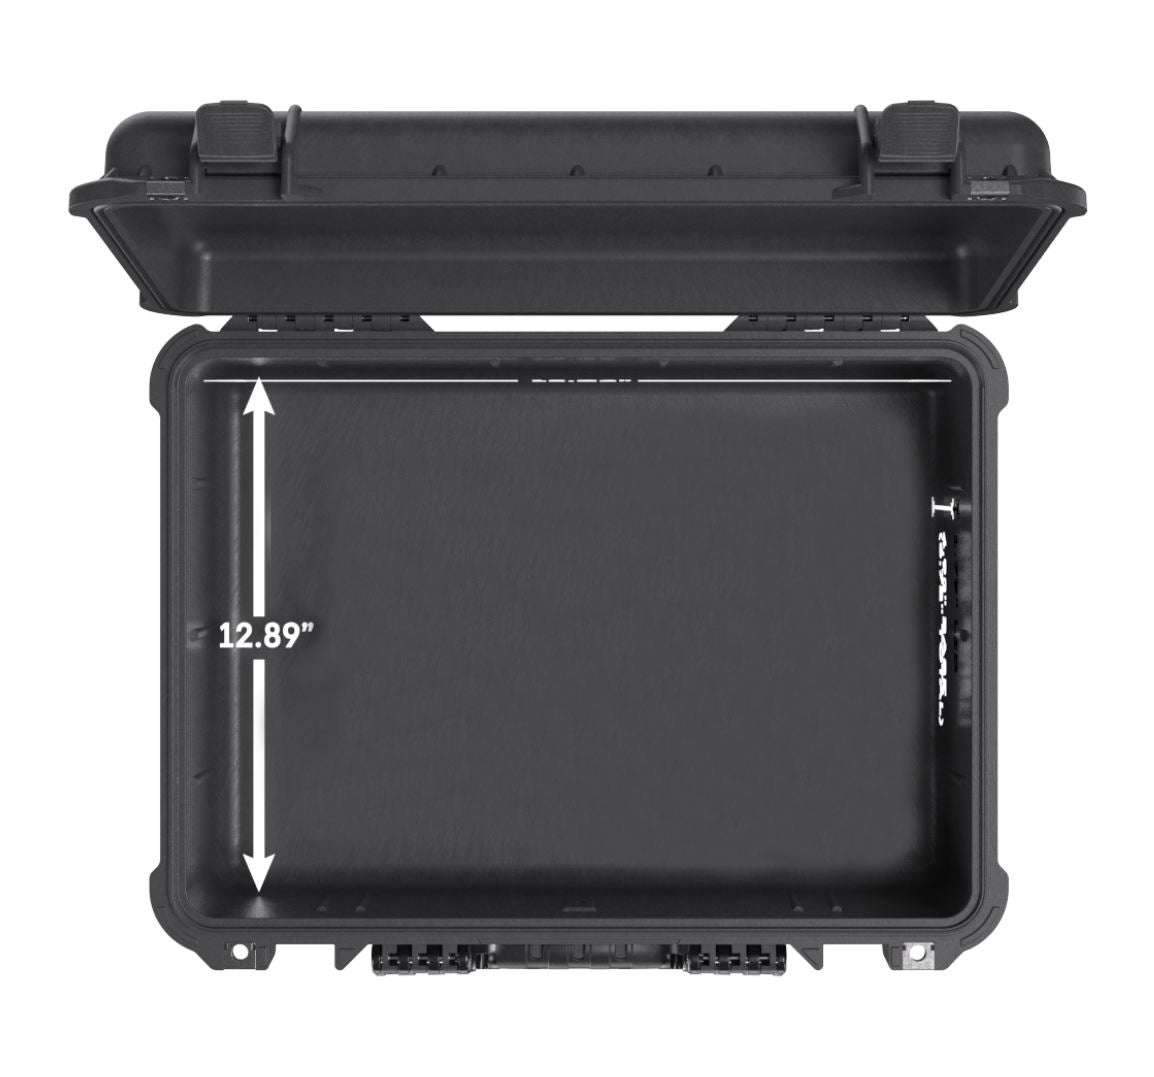 Pelican 1520 Protector Case Watertight Crushproof Dustproof Hard Casing with Automatic Purge Valve IP67 (Foam / Padded Dividers)